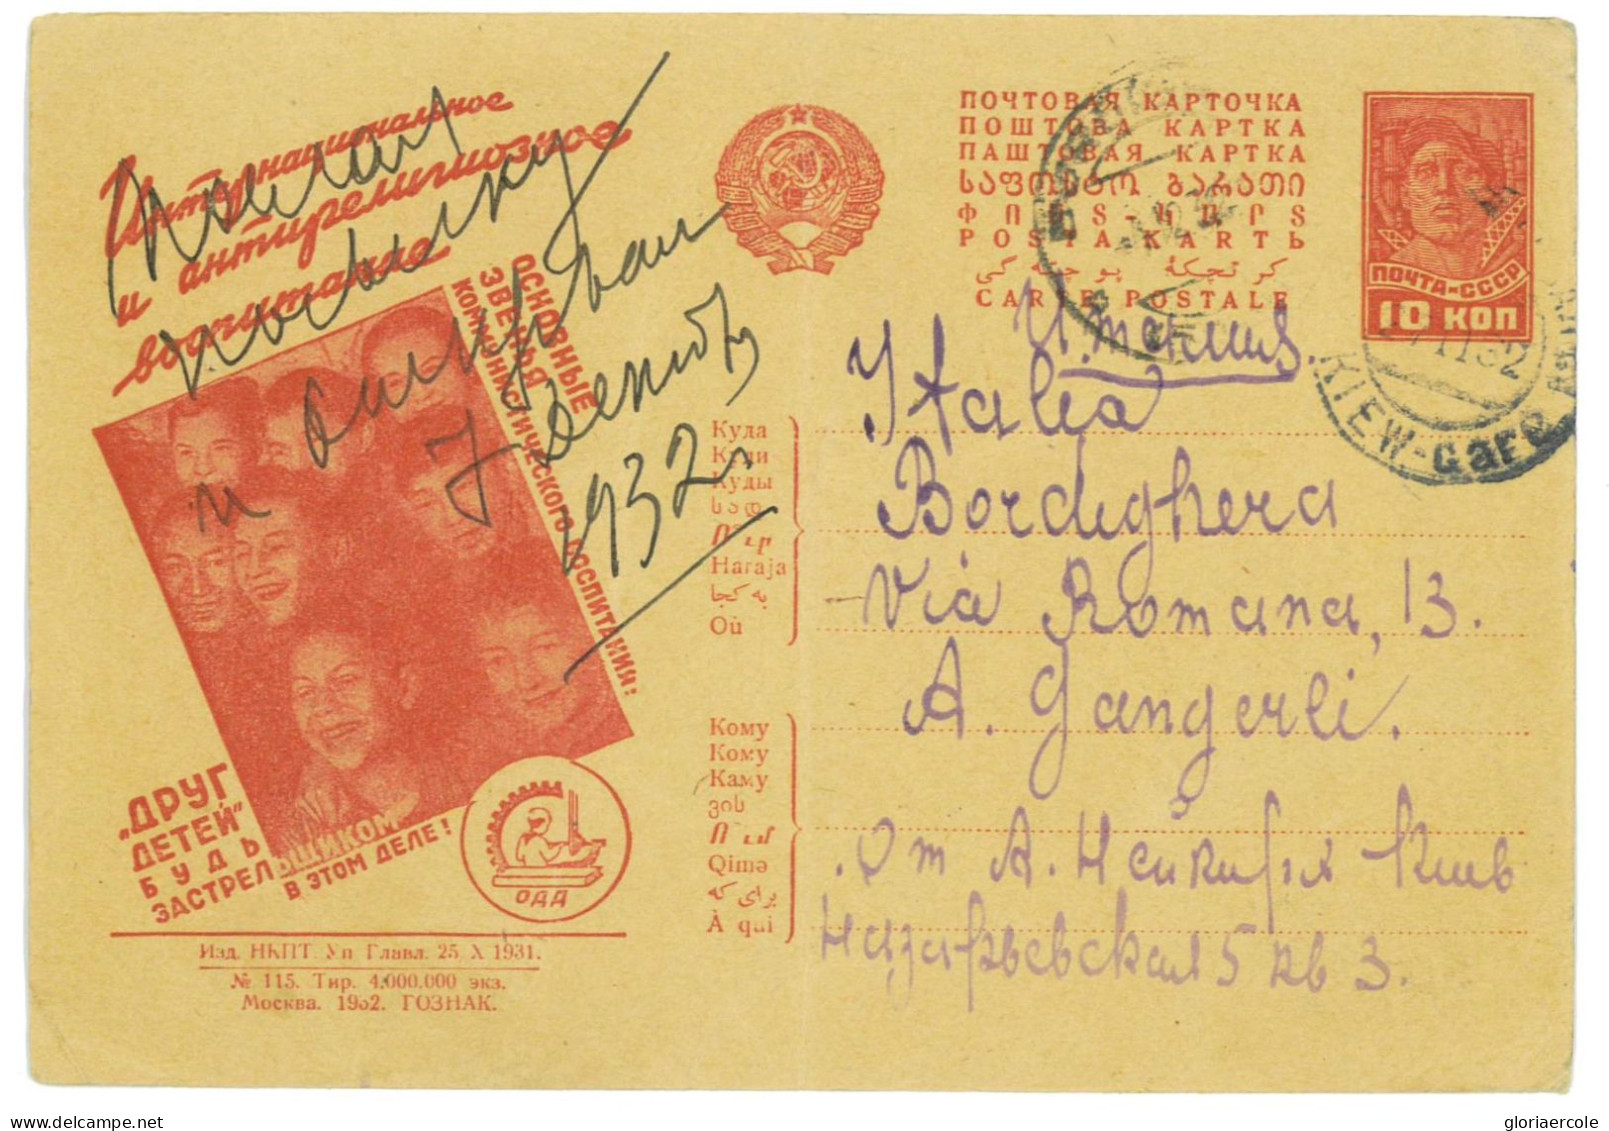 P2920 - RUSSIA , STATIONERY POST CARD MICHEL P127 /115 USED TO ITALY, 1932 - Briefe U. Dokumente